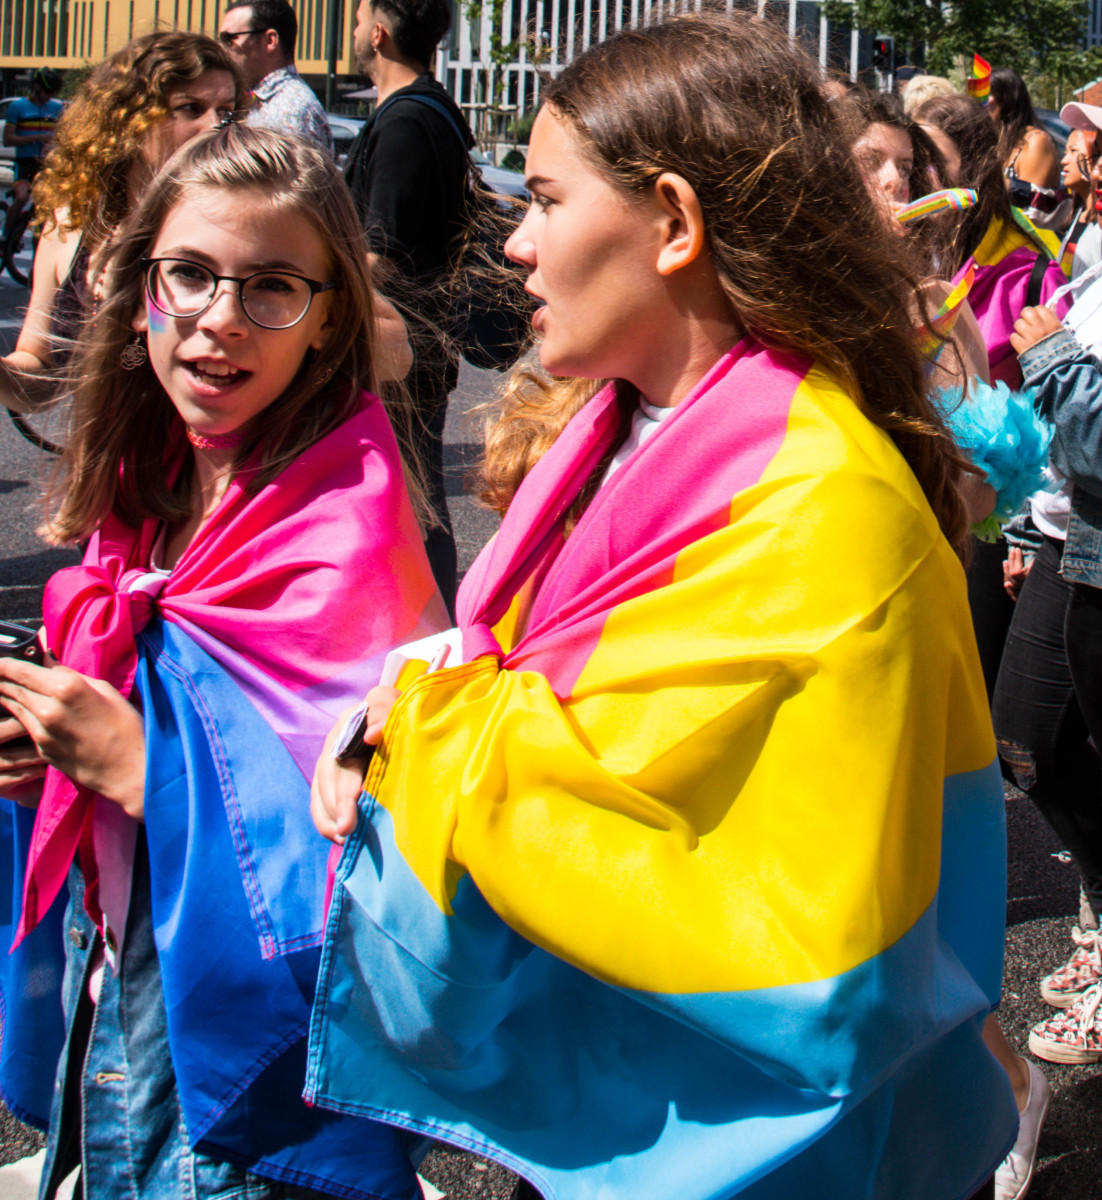 A girl wearing a bi pride flag and a girl wearing a pan pride flag at a pride festival. Malmö, Sweden 6 August 2017